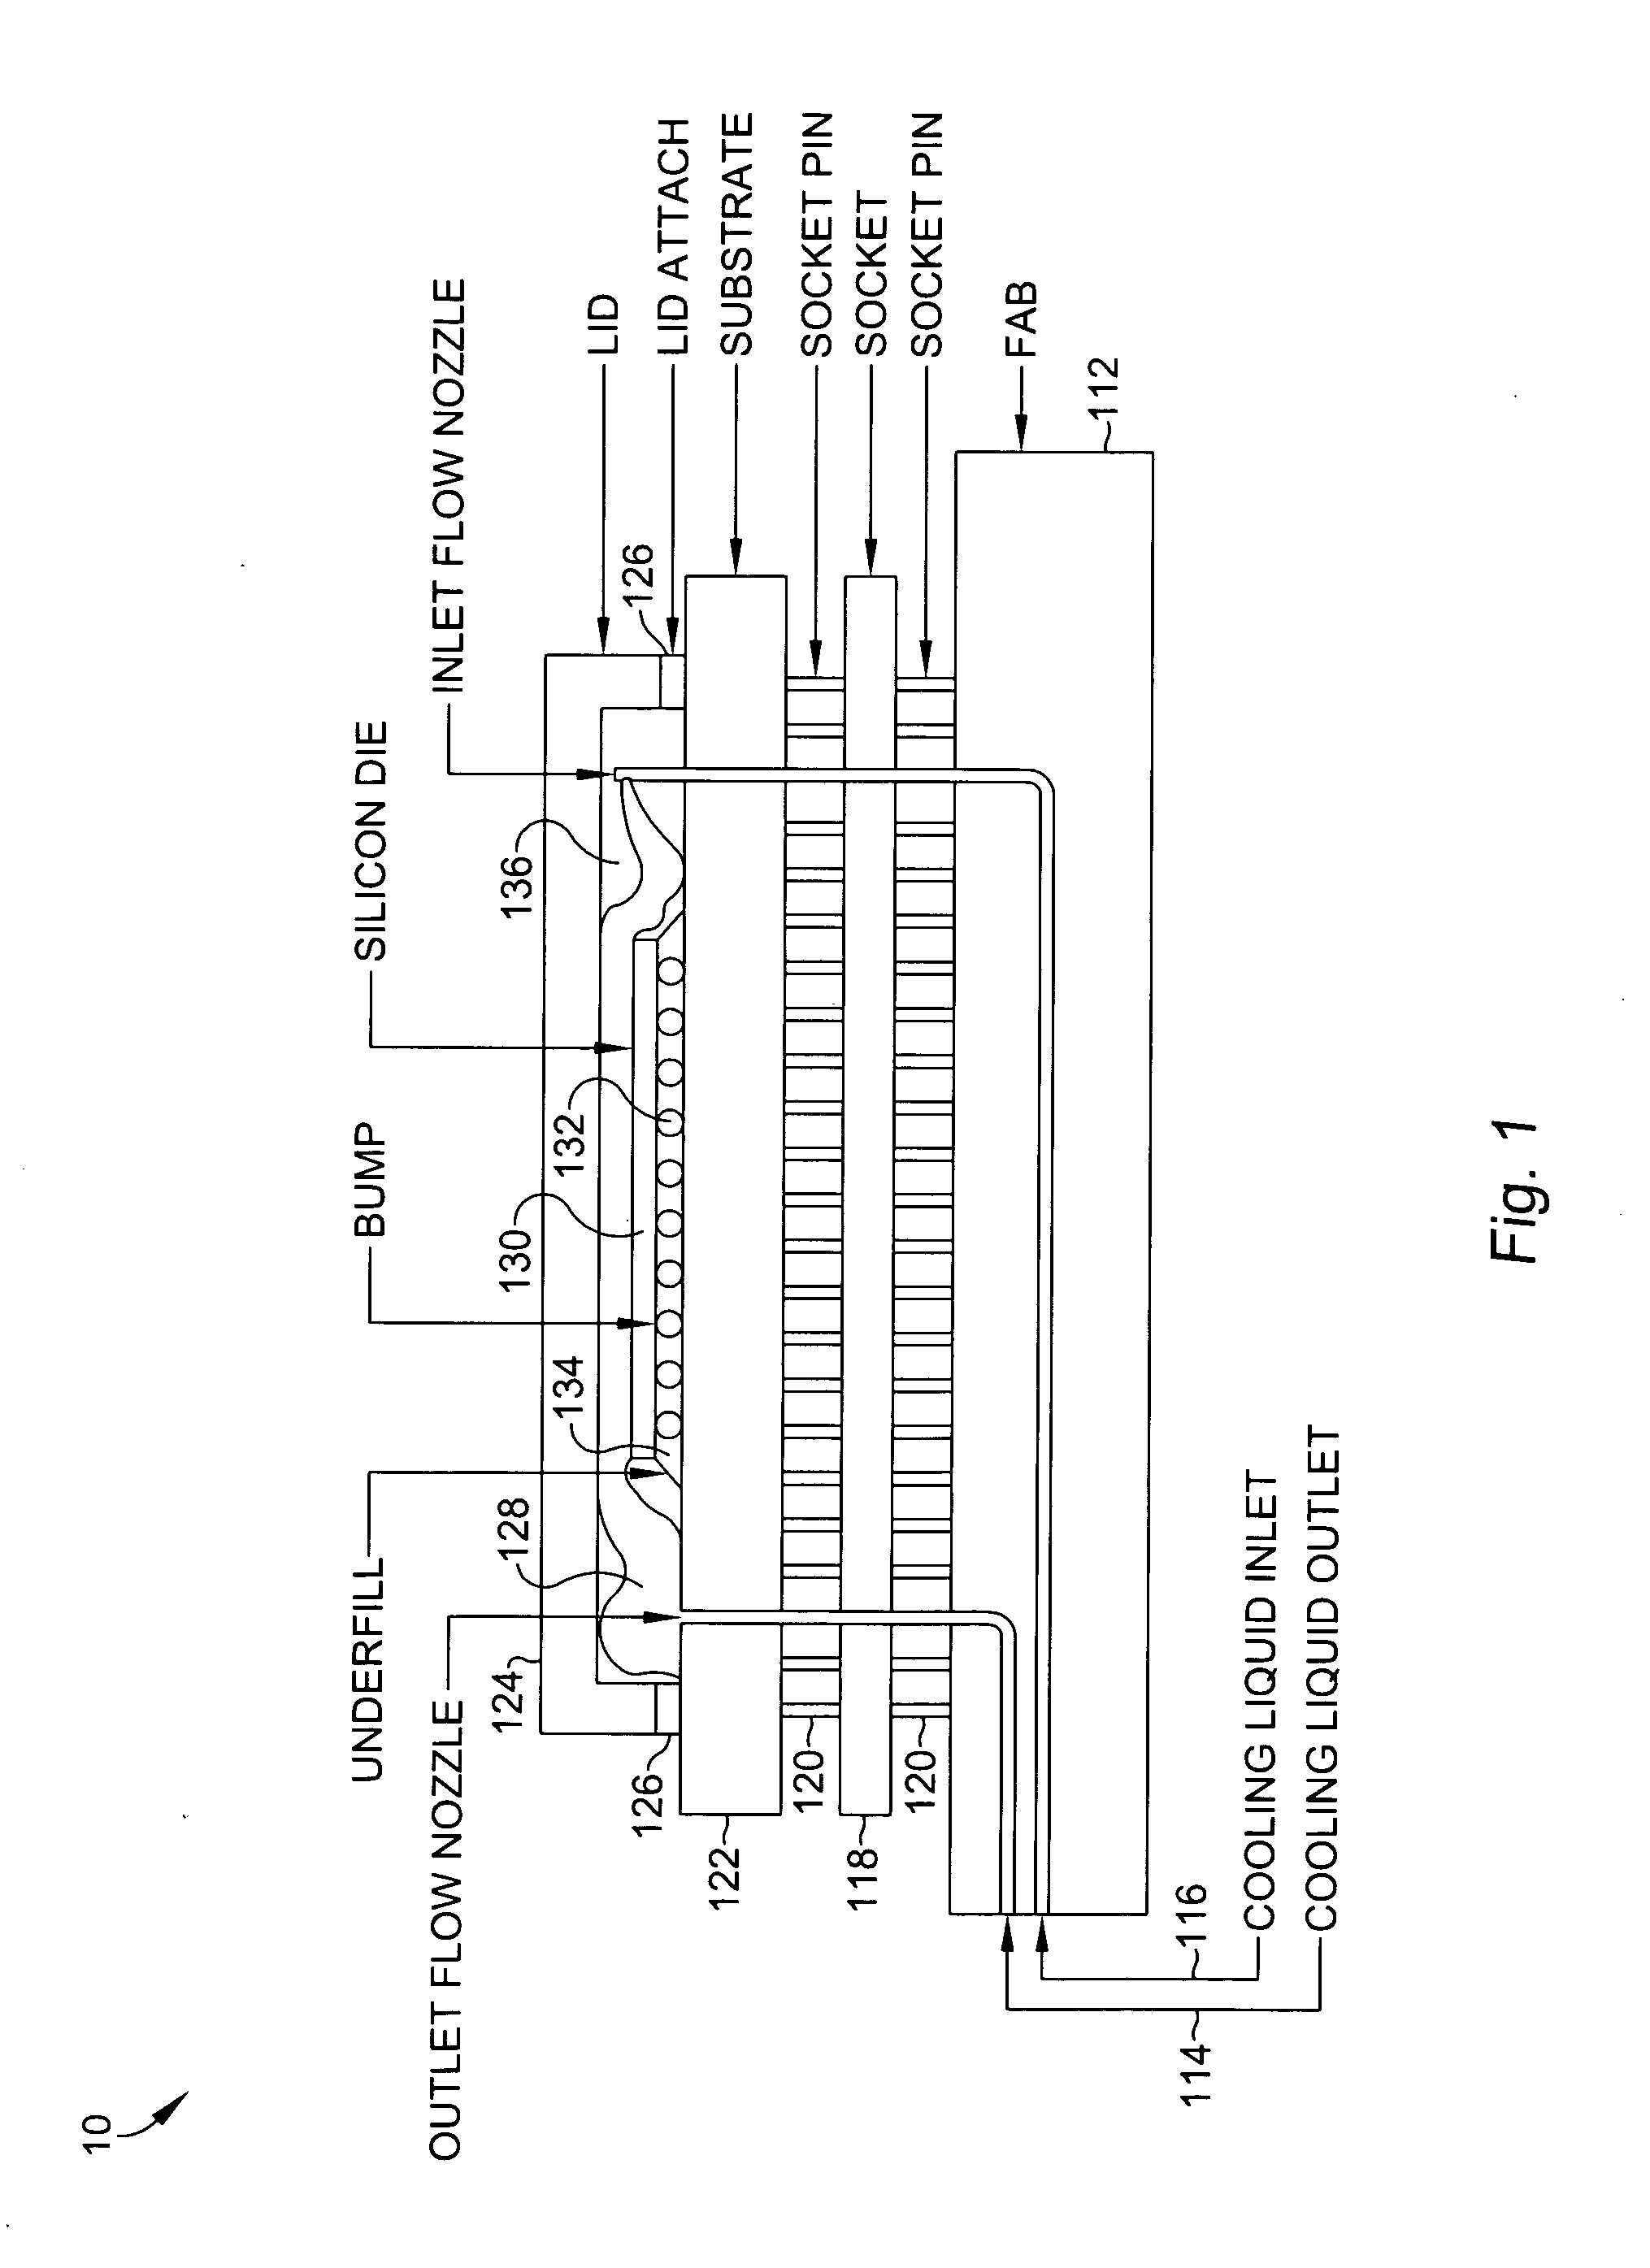 Direct contact cooling liquid embedded package for a central processor unit